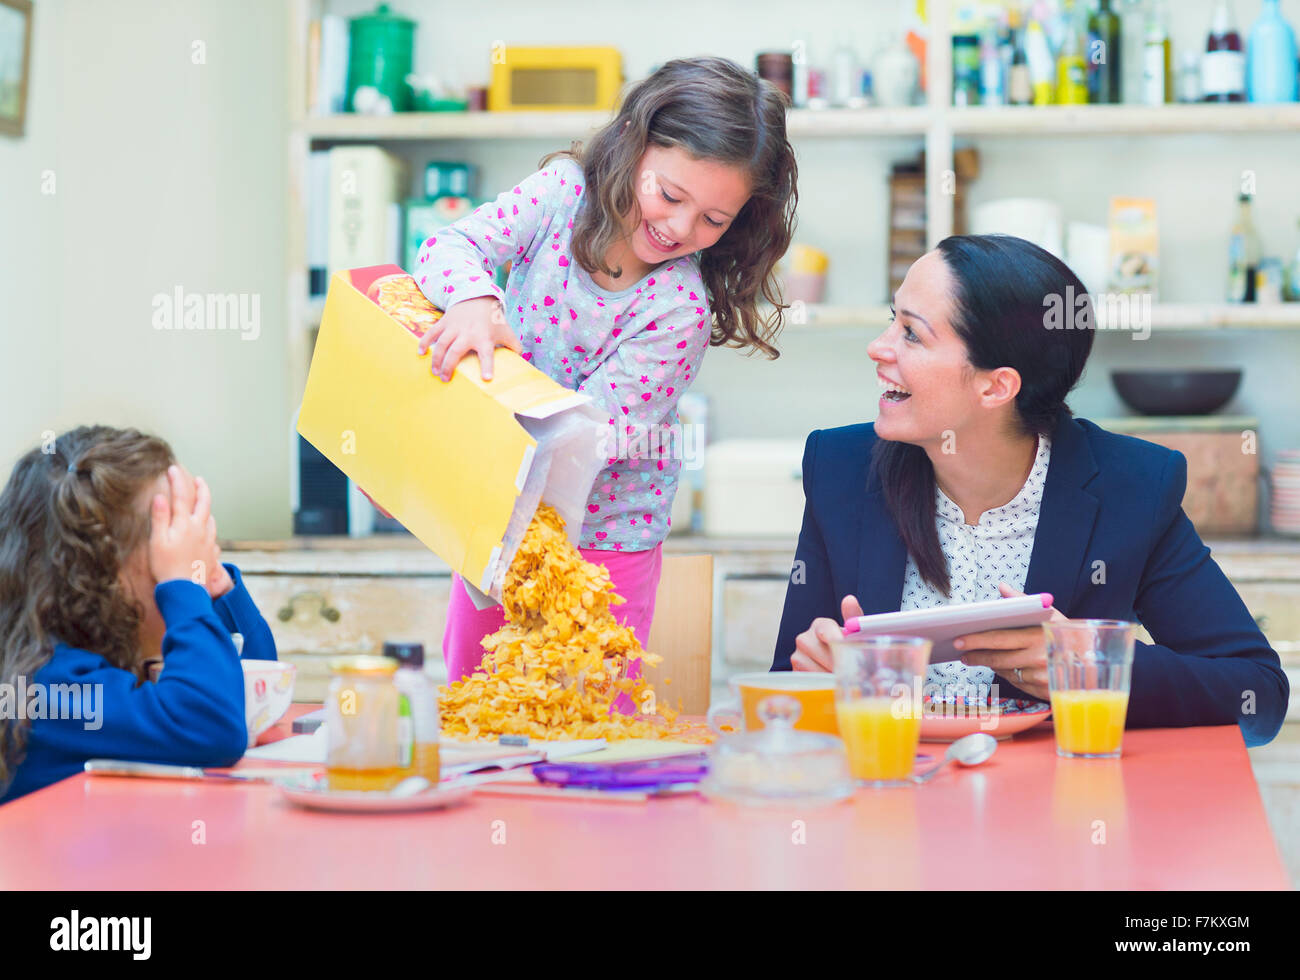 Playful girl pouring abundance of cereal onto breakfast table Stock Photo